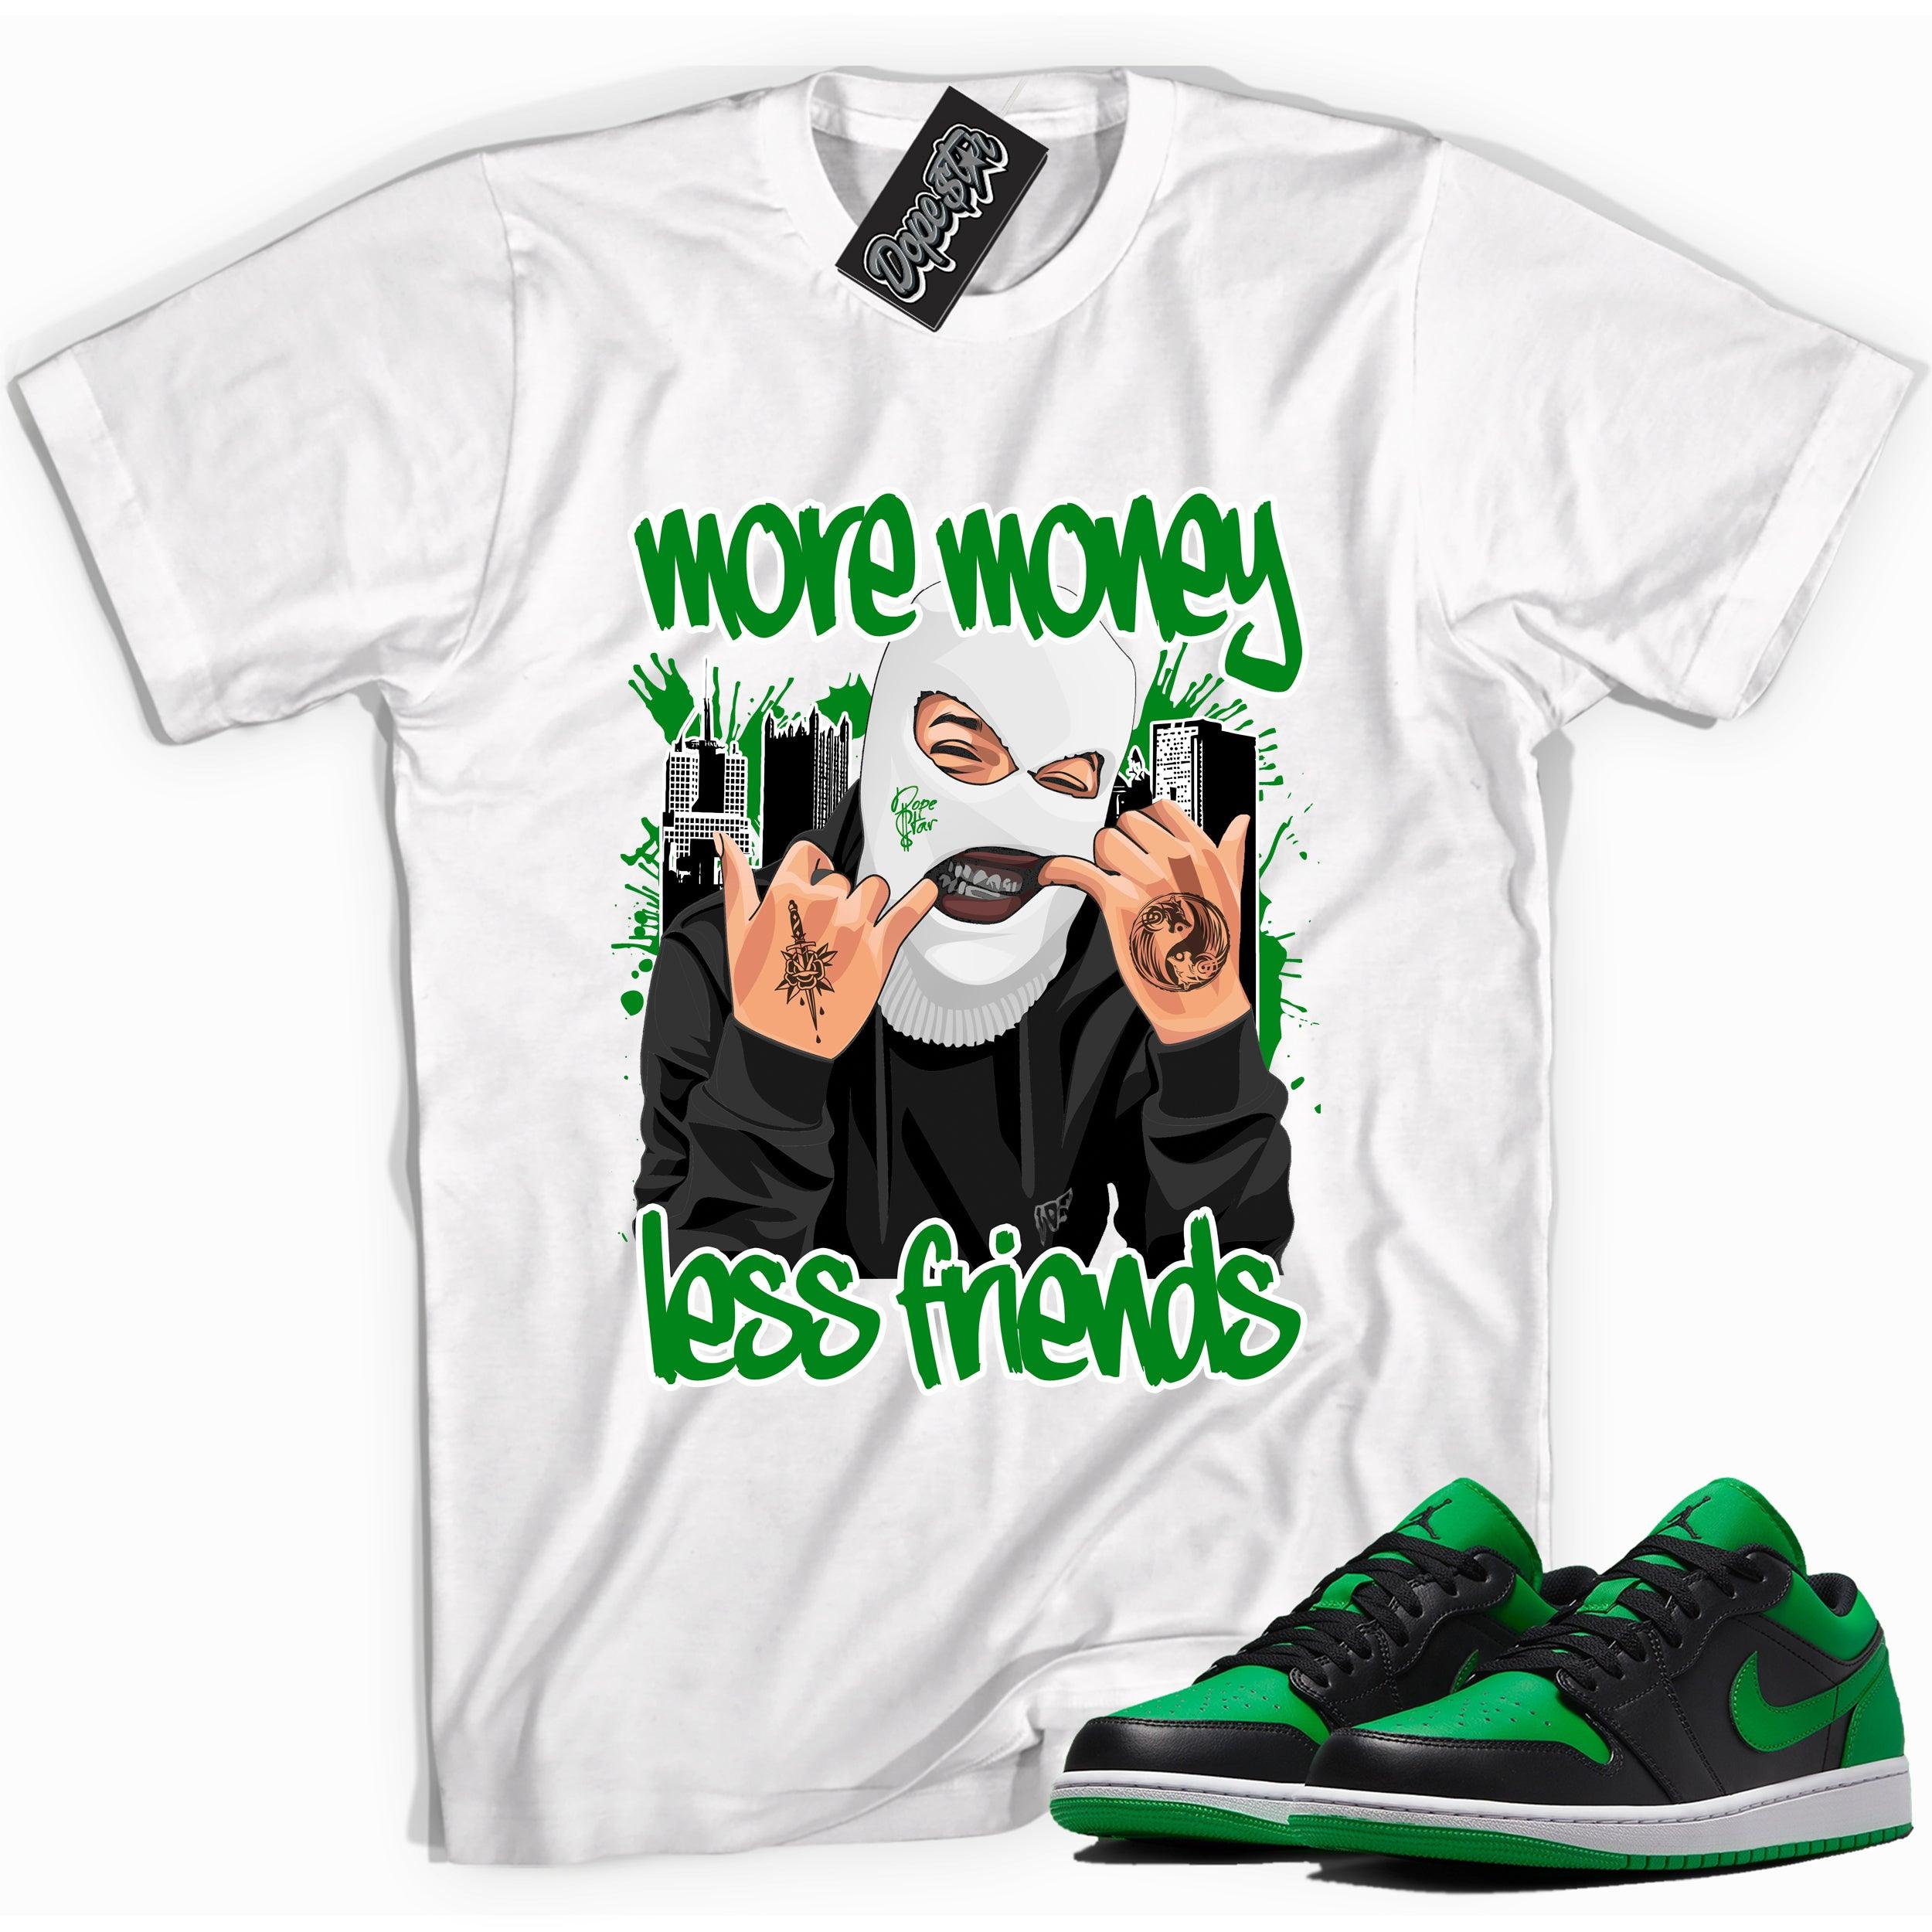 Cool white graphic tee with 'more money less friends' print, that perfectly matches Air Jordan 1 Low Lucky Green sneakers